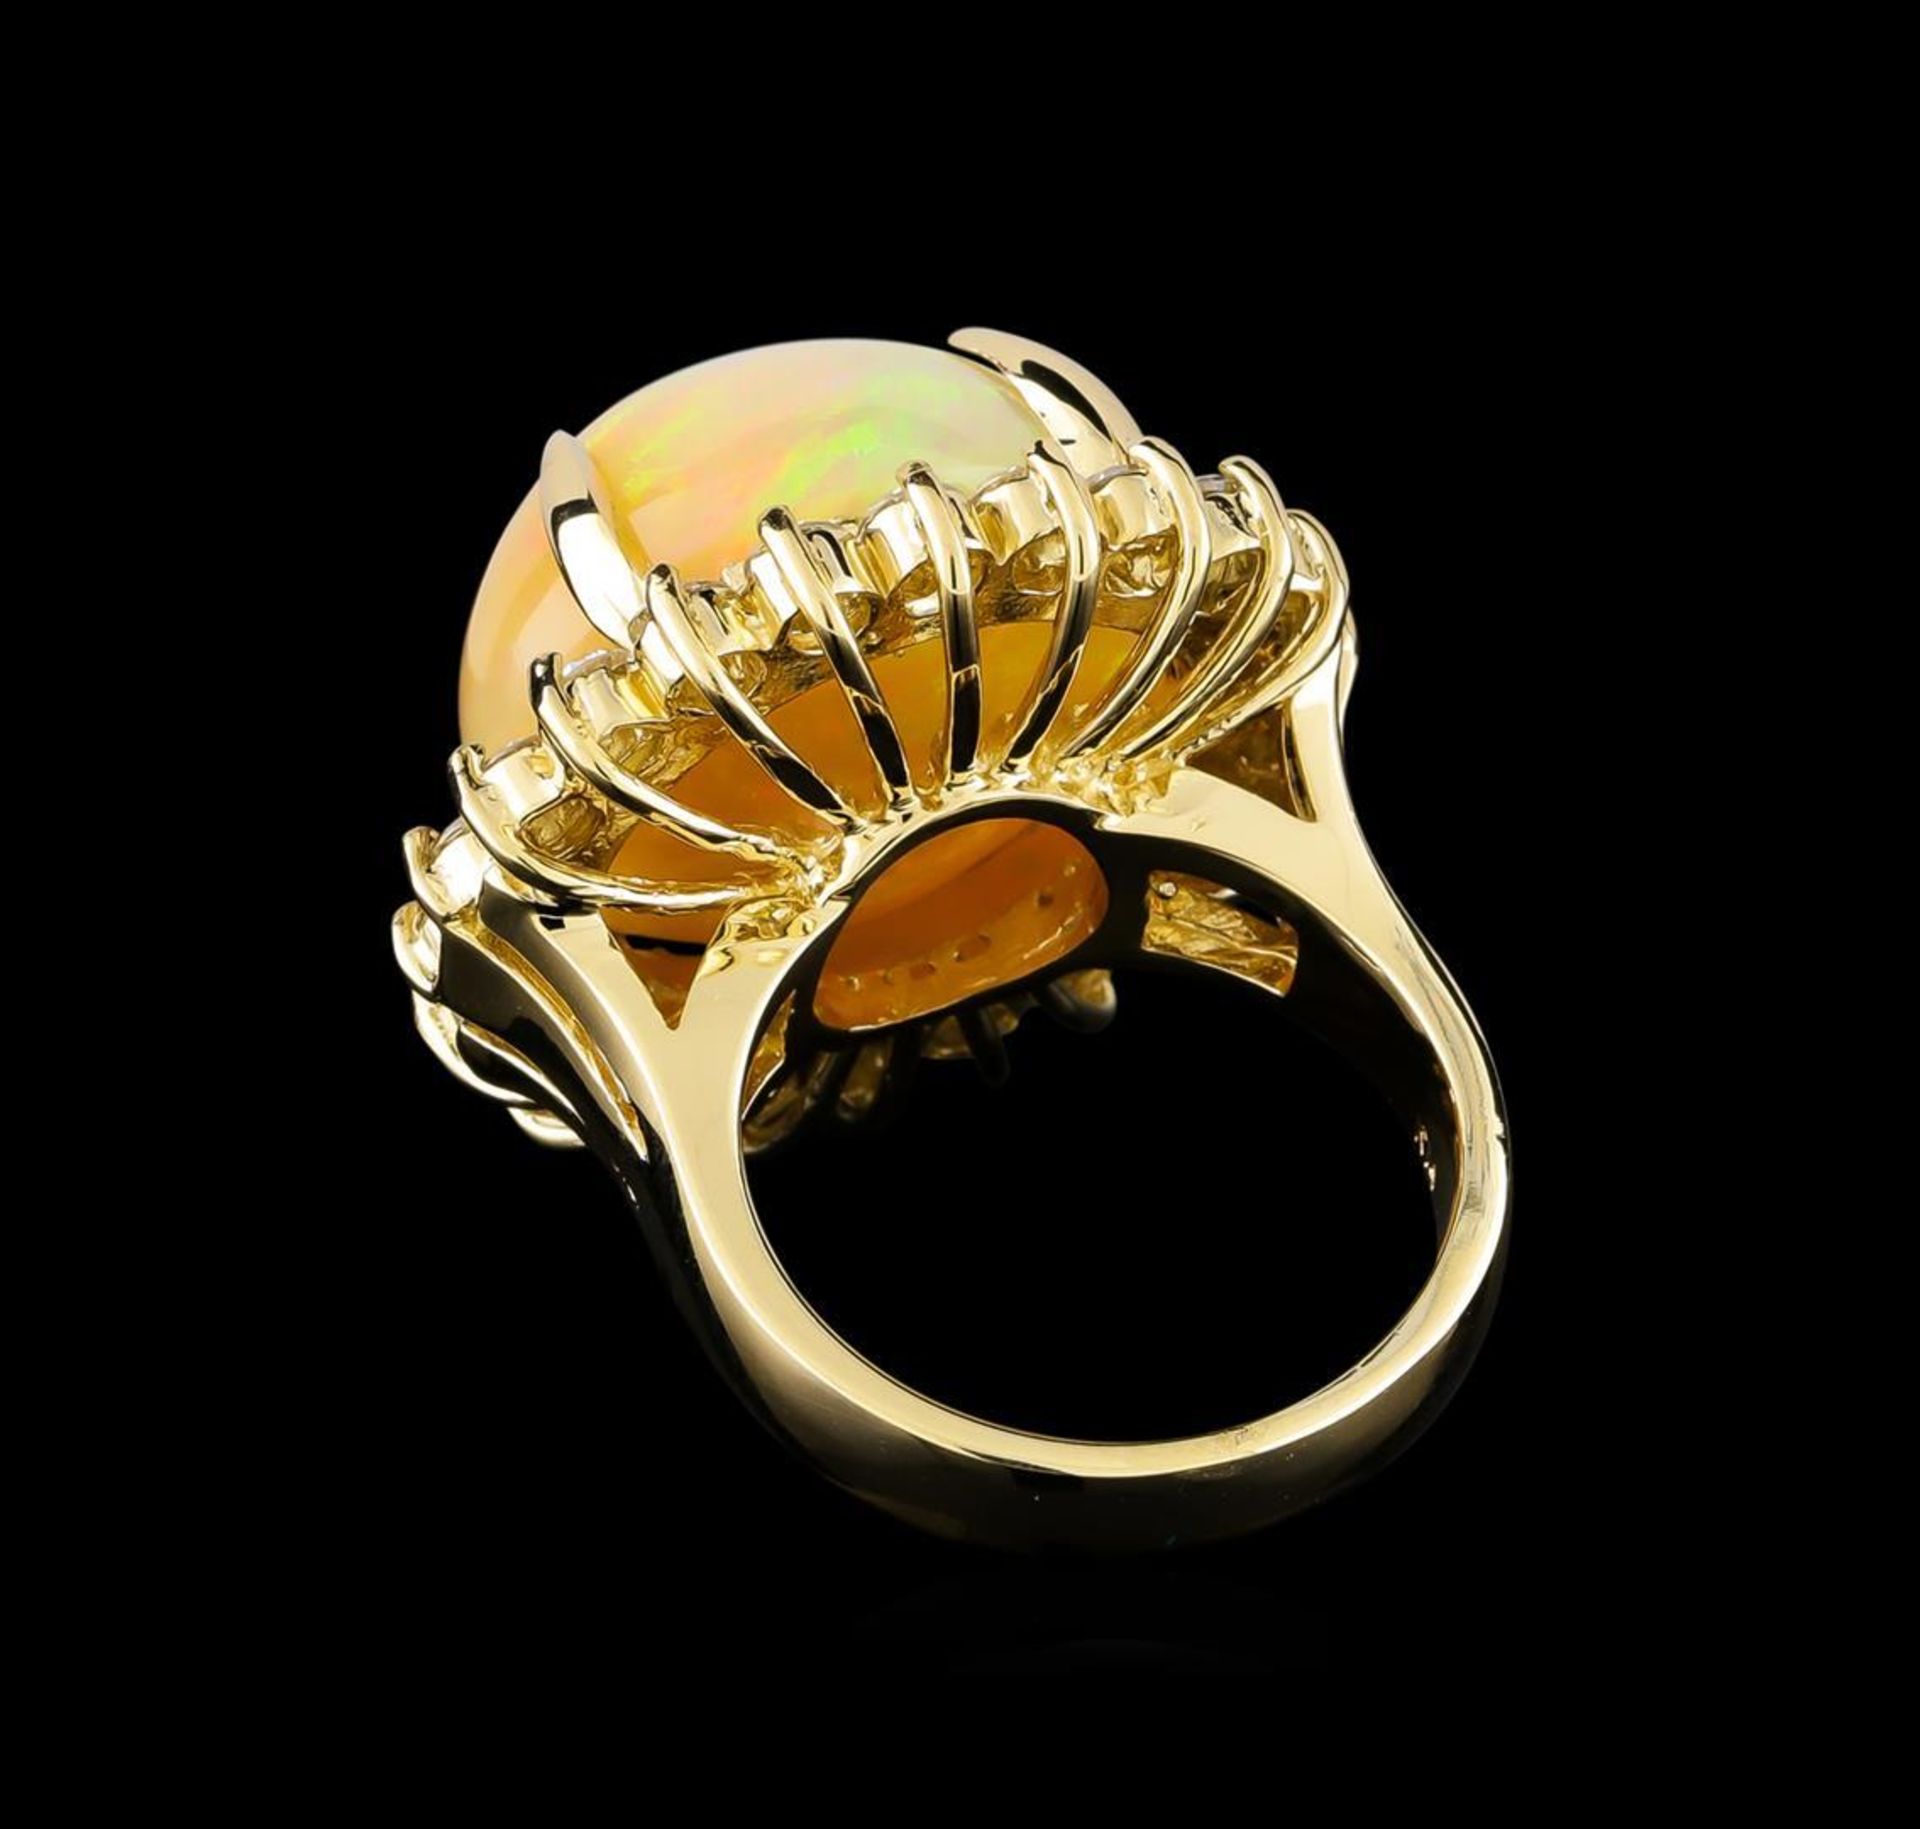 19.85 ctw Opal and Diamond Ring - 14KT Yellow Gold - Image 3 of 5